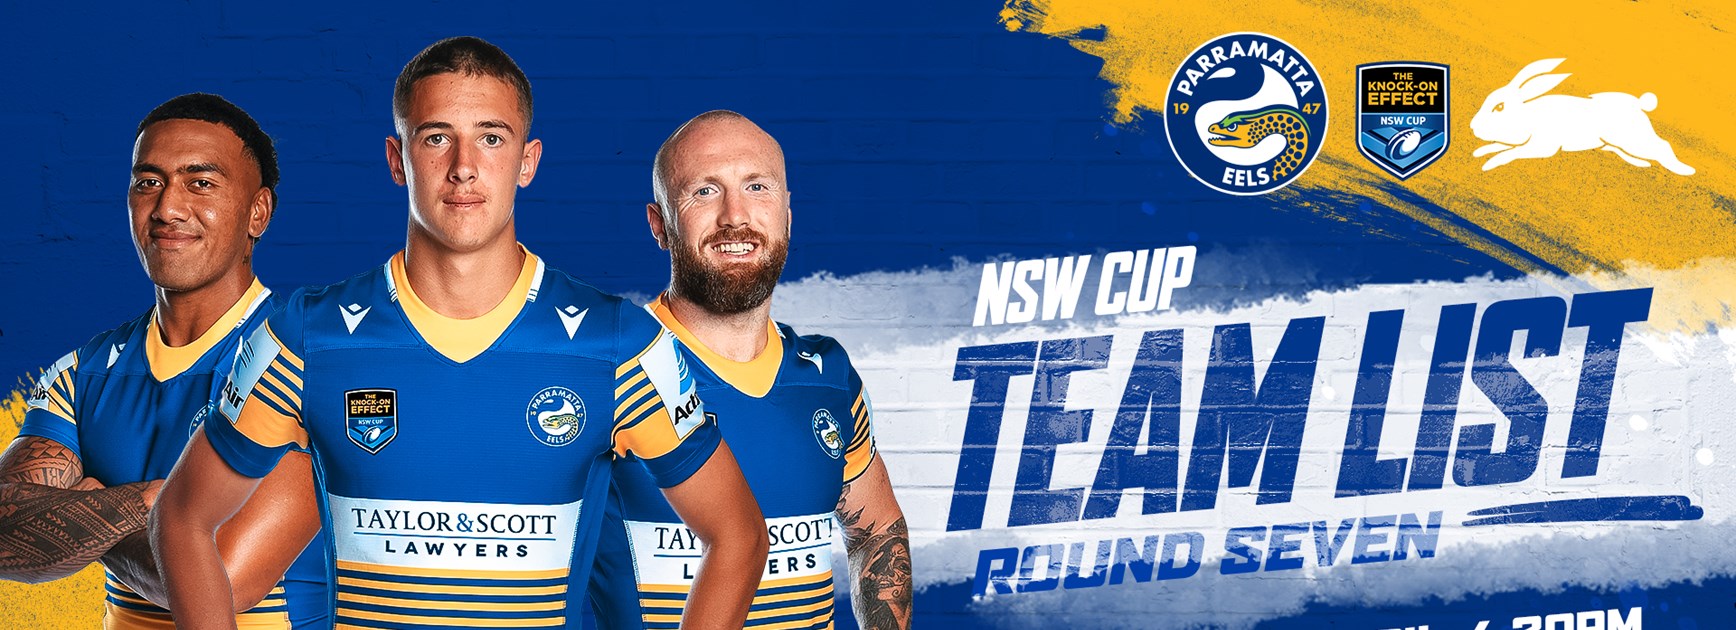 NSW Cup Team List - Eels v Rabbitohs, Round Seven